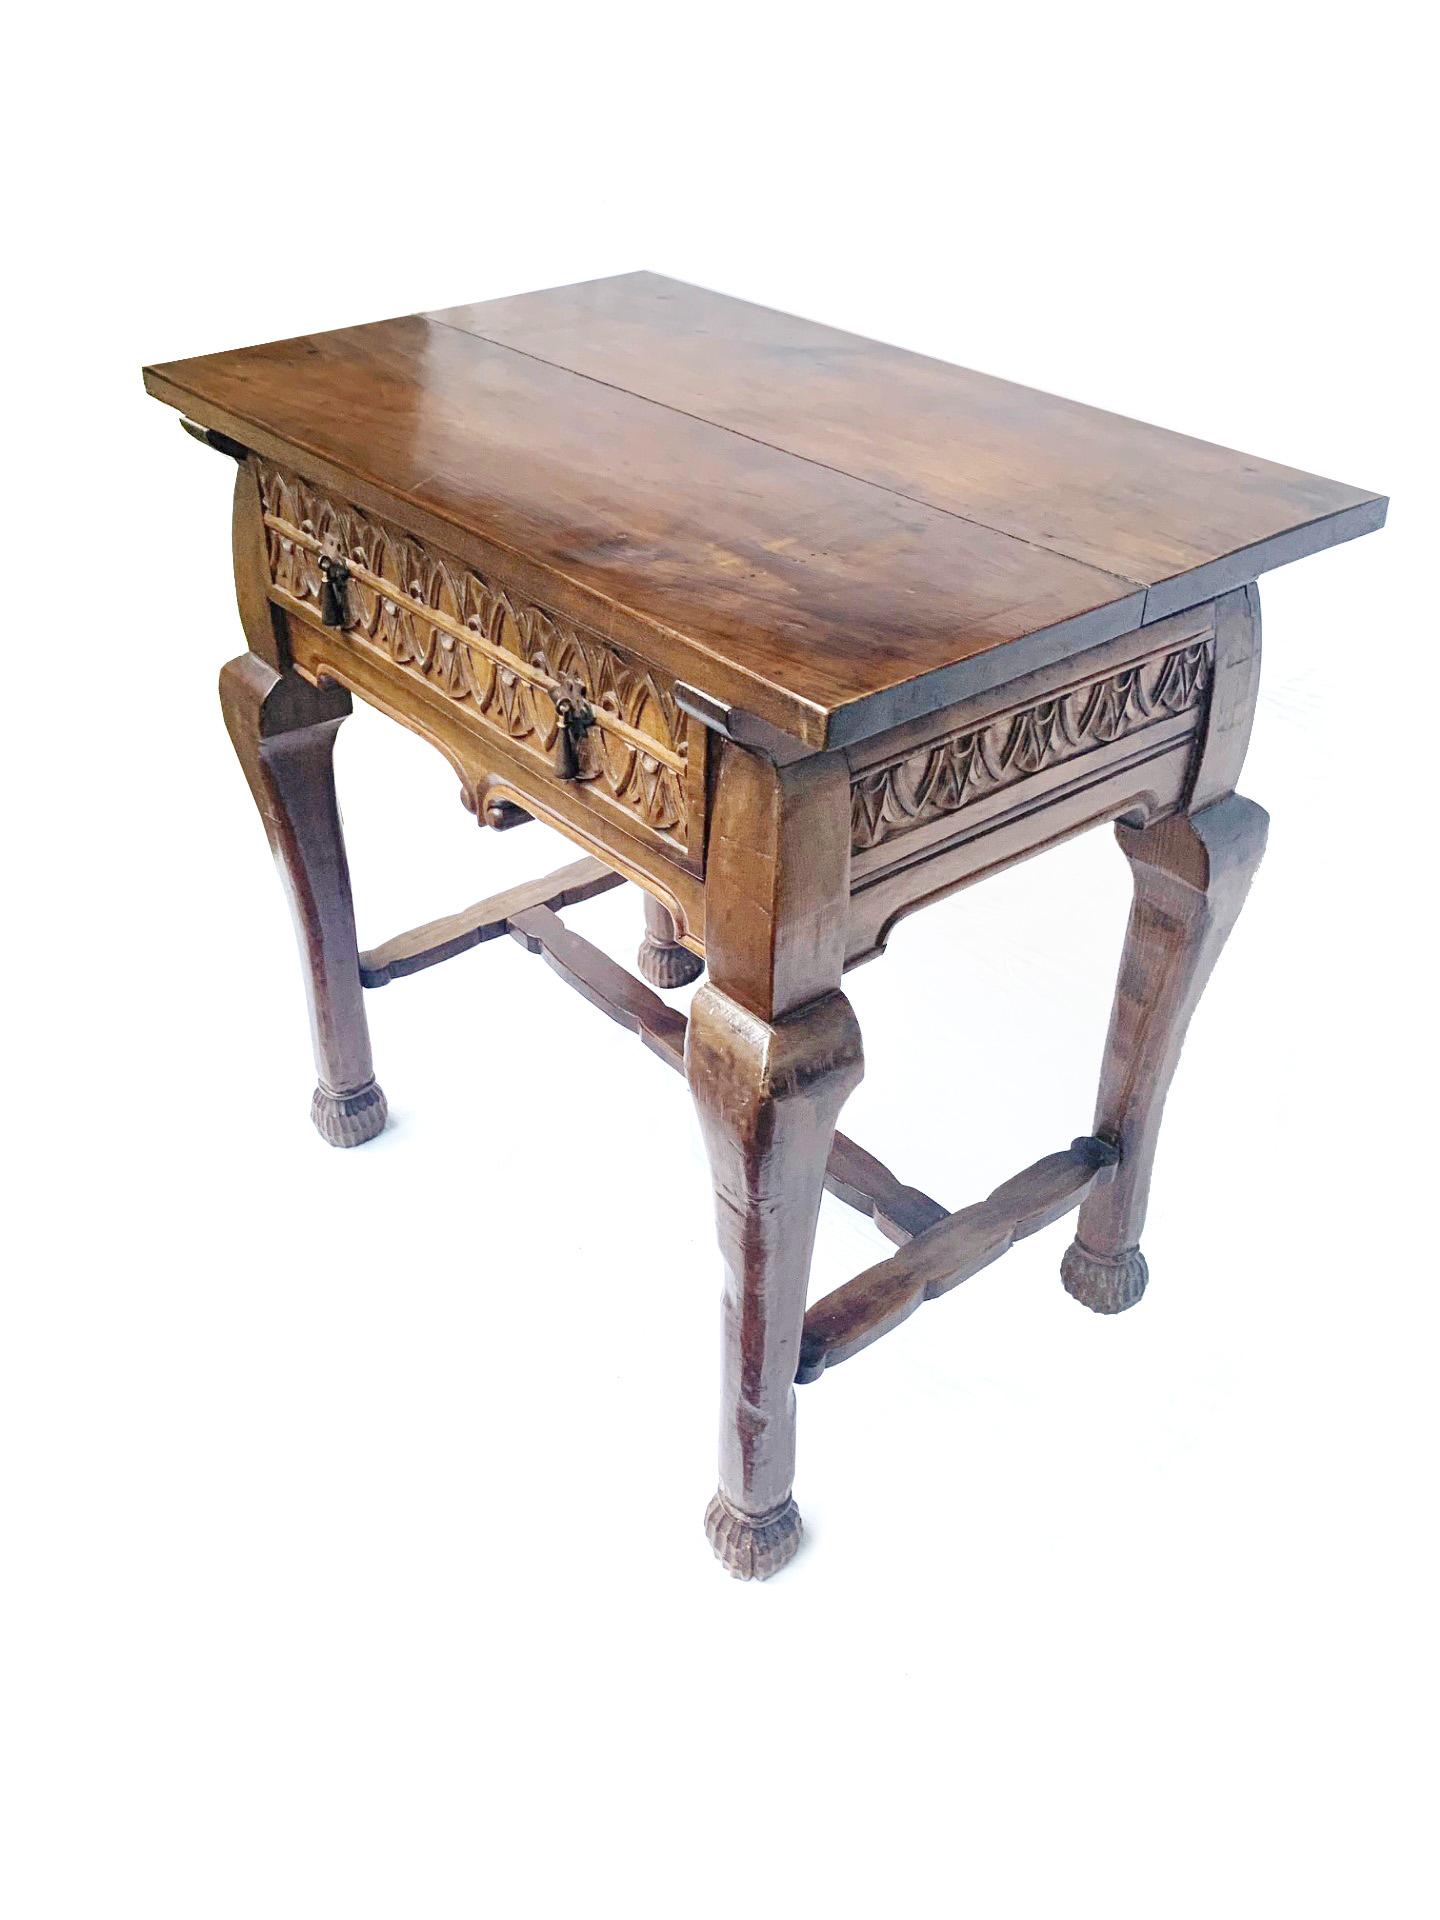 South American Circa 1940 Spanish Colonial Revival Sideboard Table Console For Sale